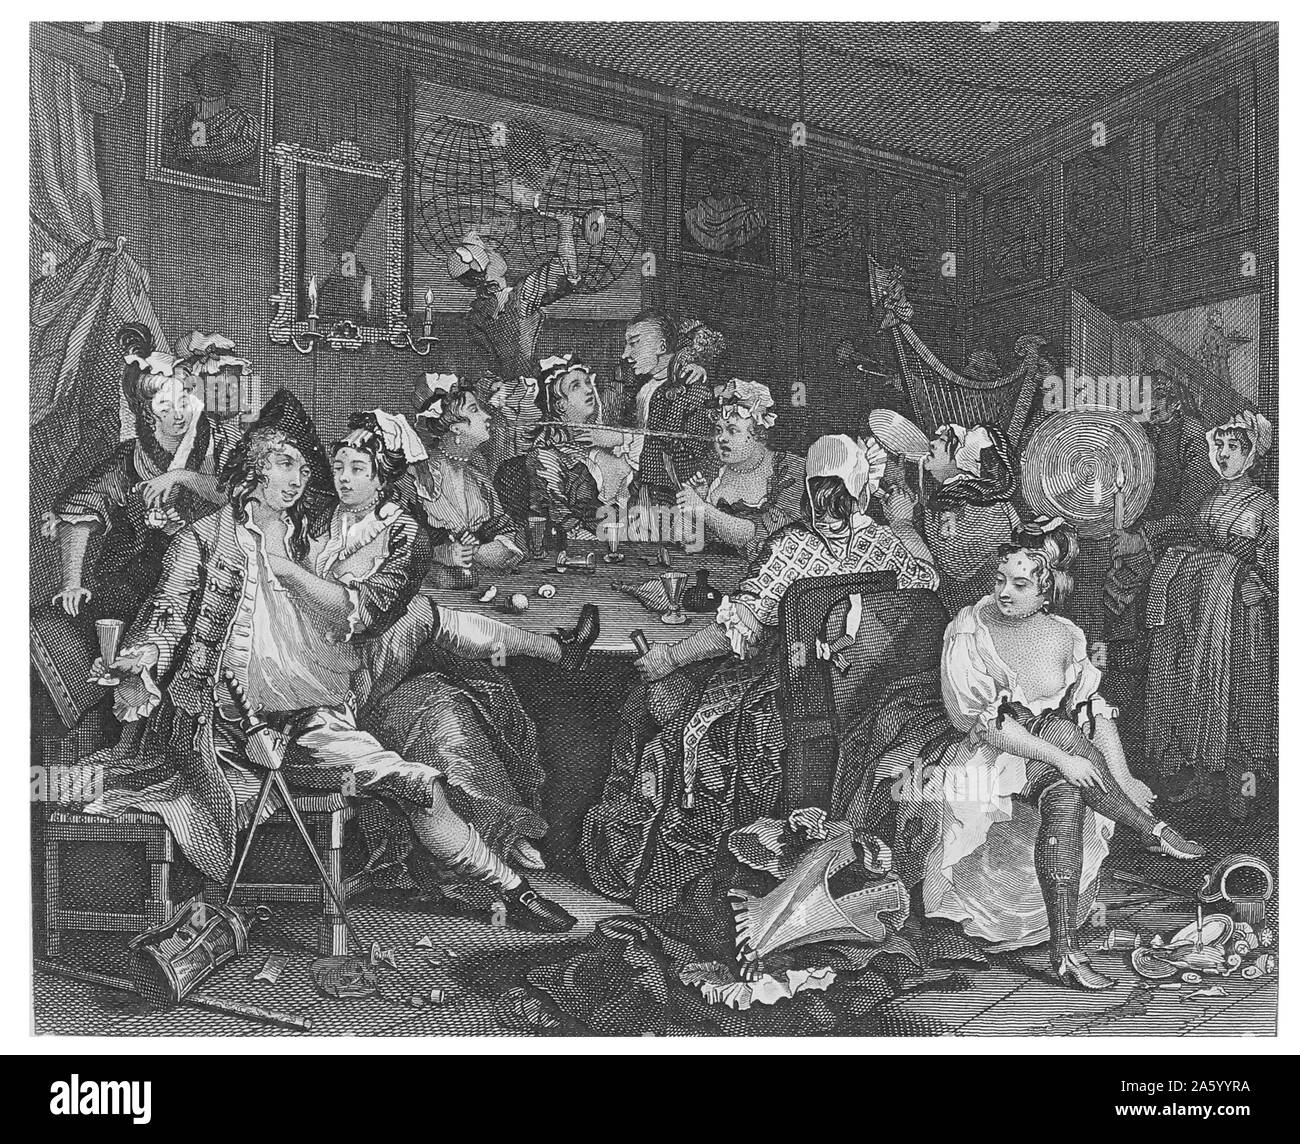 Engraving titled 'The Rake's Progress' by William Hogarth (1697-1764) English painter, printmaker, pictorial satirist, social critic, and editorial cartoonist who has been credited with pioneering western sequential art. Dated 18th Century. Stock Photo